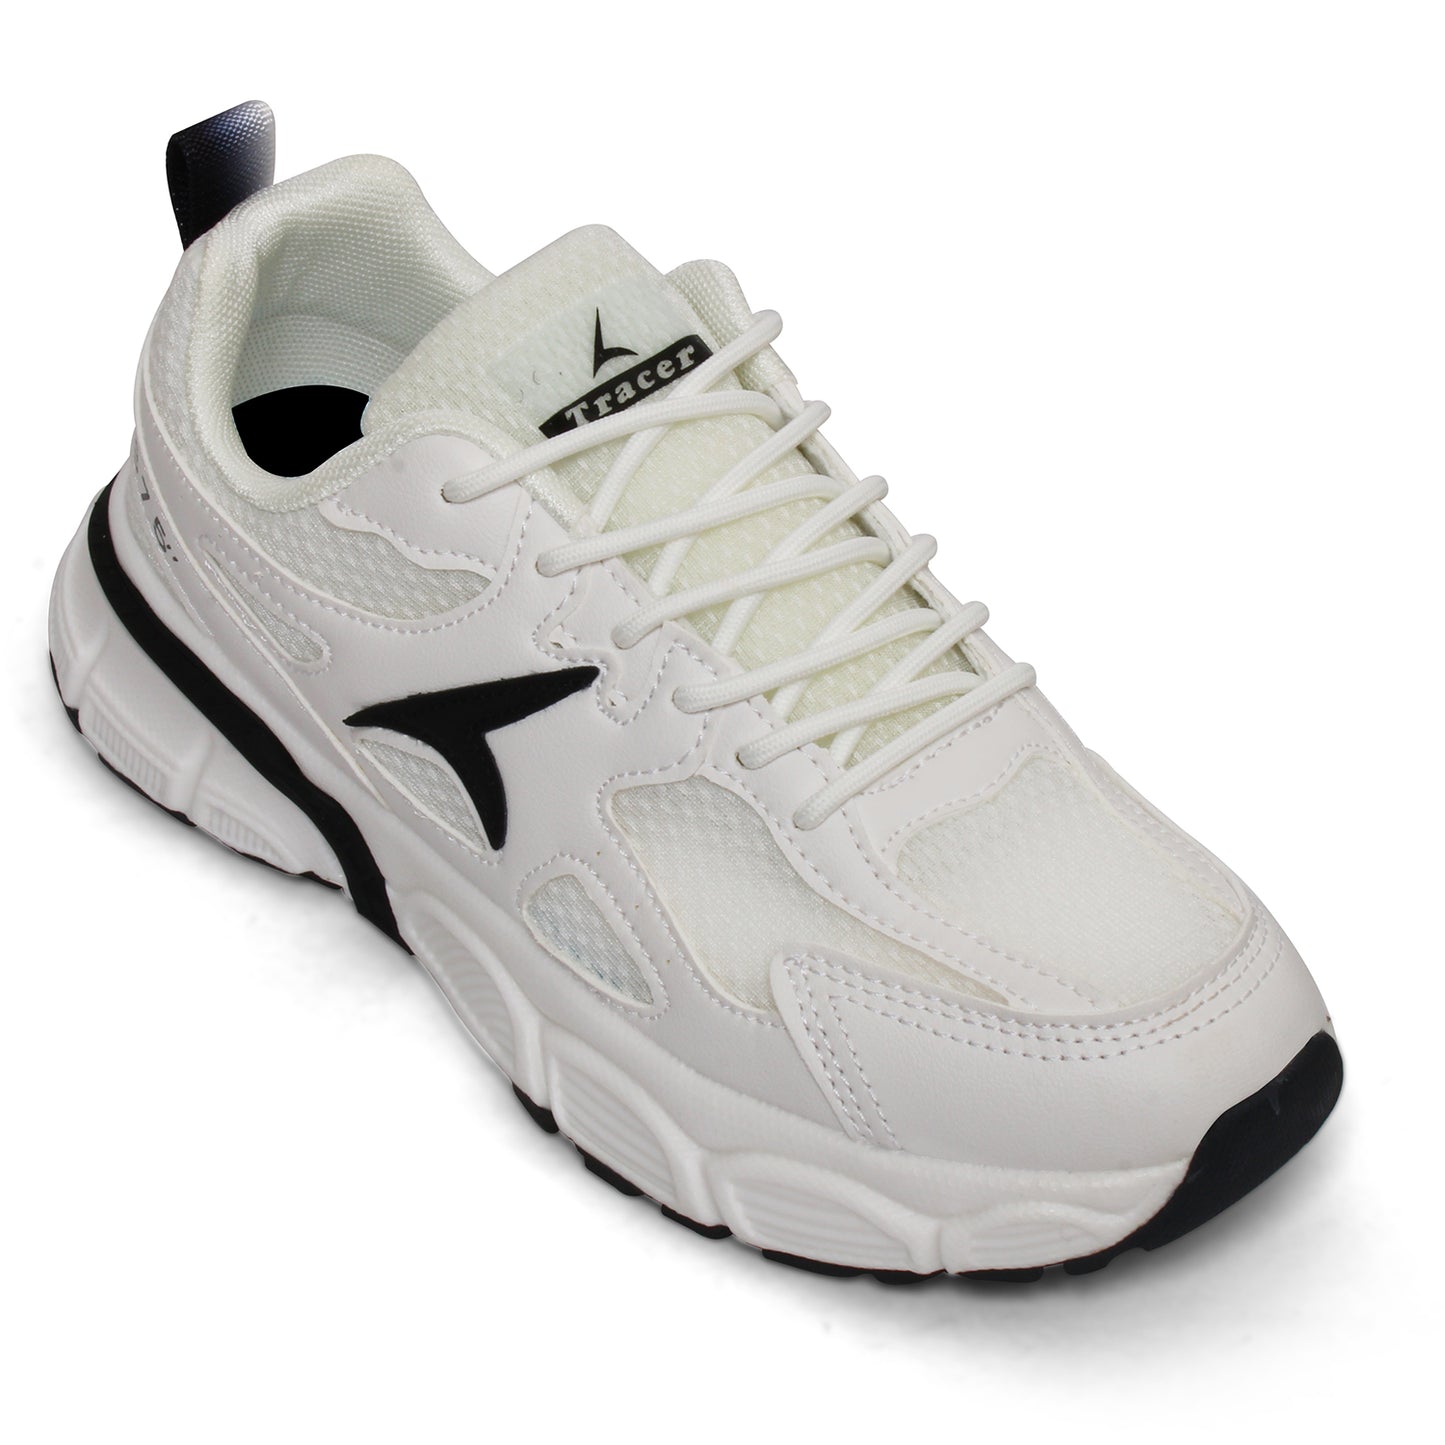 Tracer India Conquer 2619 Sneaker White